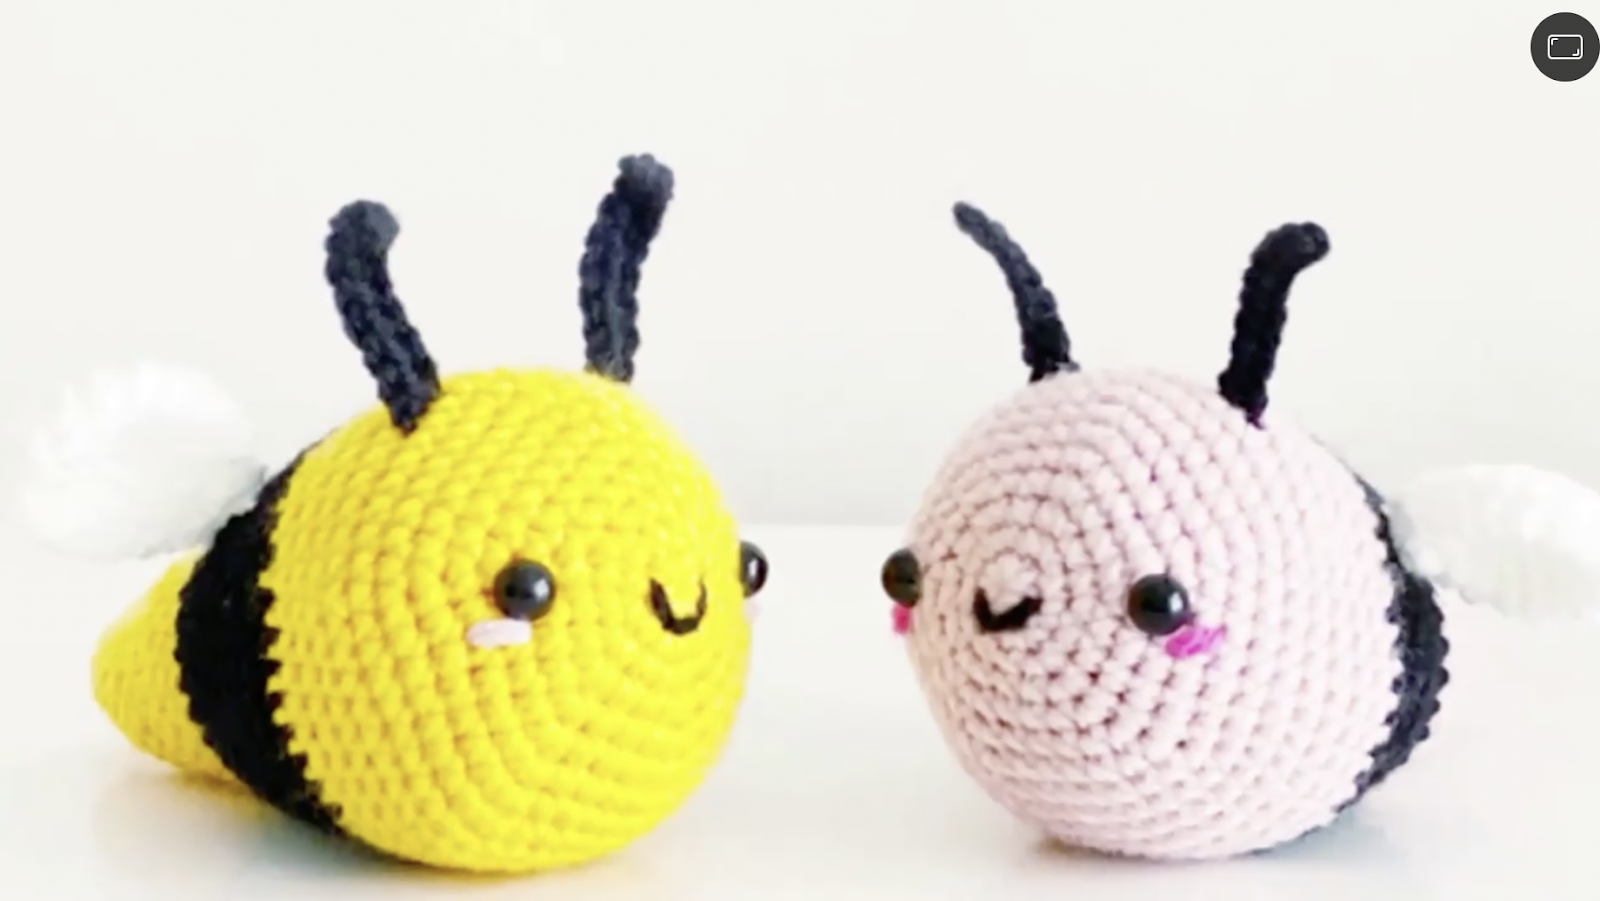 Learn how to make basic amigurumi bodies in 9 different ways